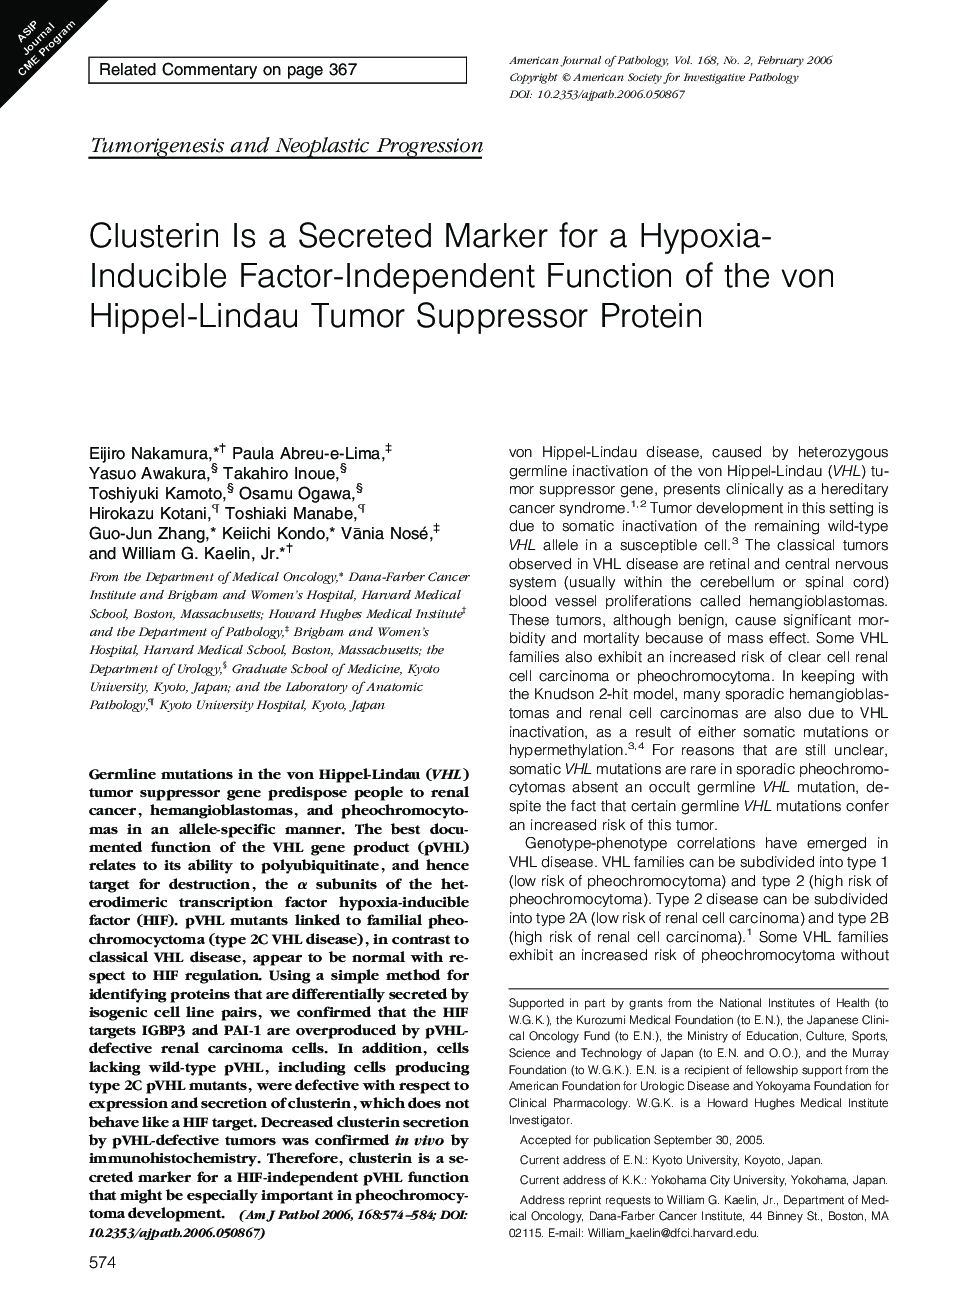 Clusterin Is a Secreted Marker for a Hypoxia-Inducible Factor-Independent Function of the von Hippel-Lindau Tumor Suppressor Protein